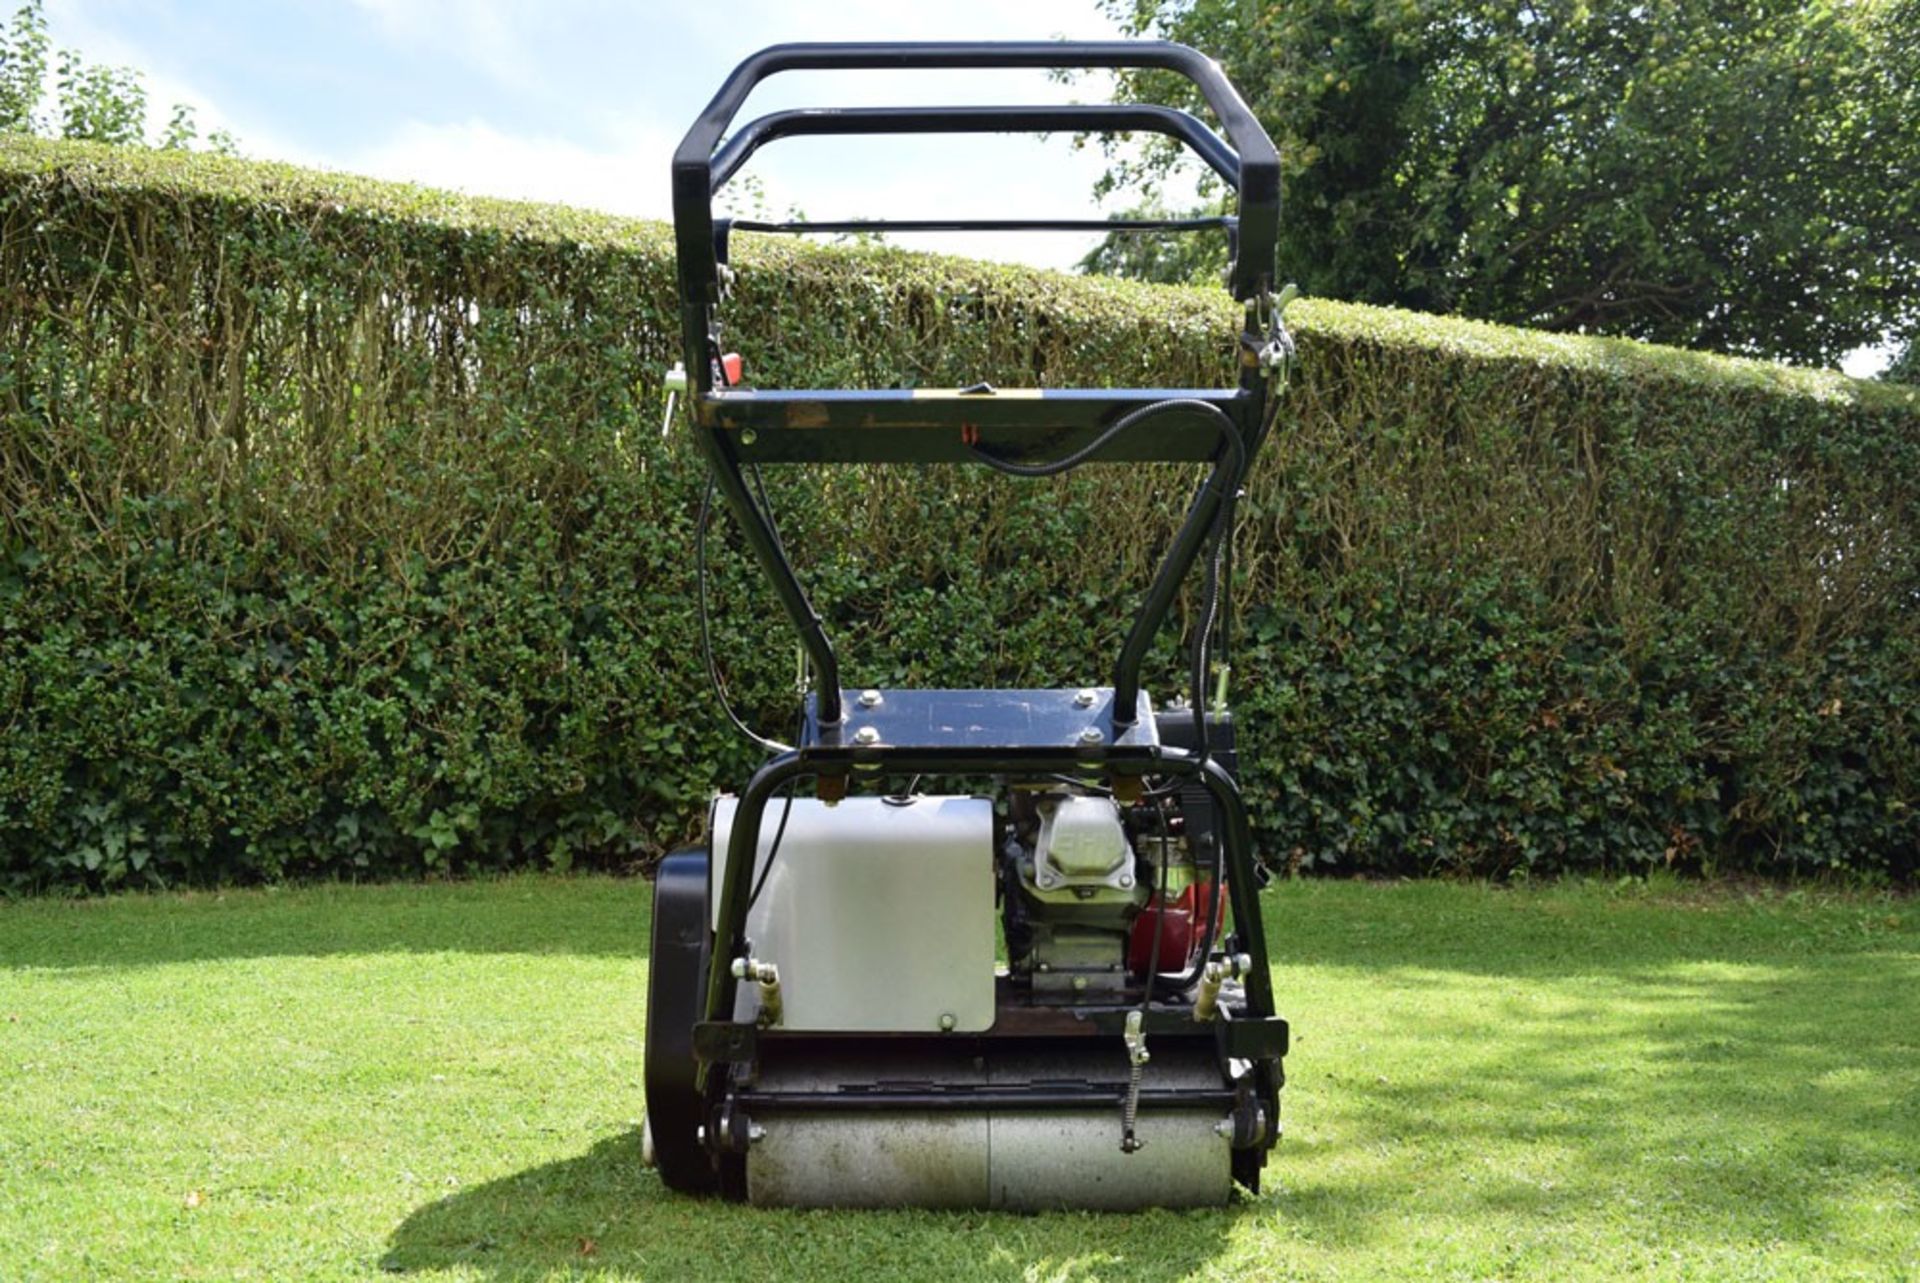 2012 Allett Shaver 20, 10 Blade Cylinder Mower With Grass Box - Image 6 of 8